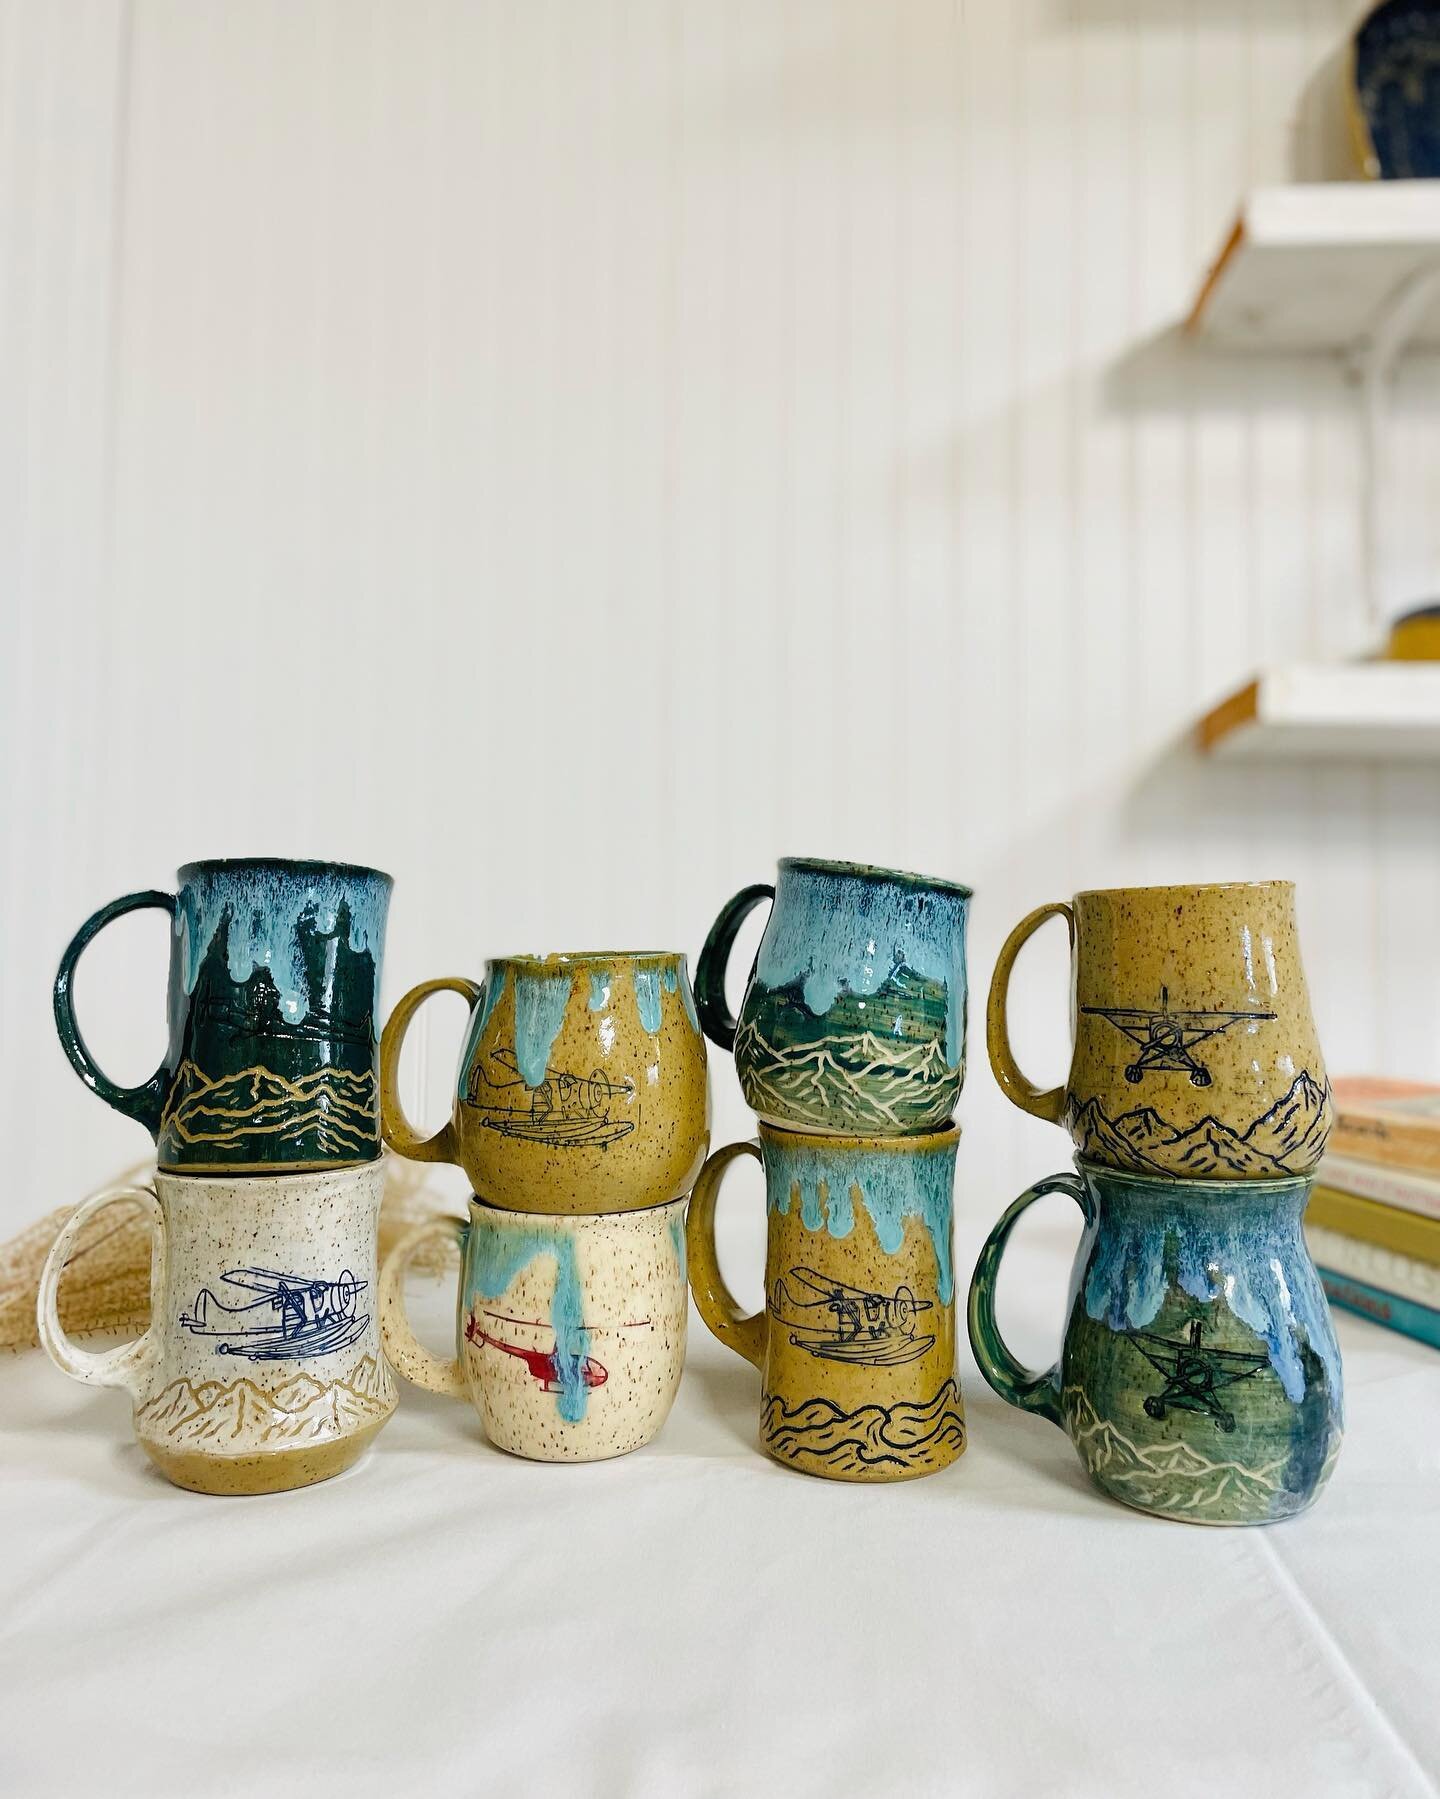 Lots of big changes going on right now &hellip; but I can&rsquo;t wait to get back to making more aviation mugs and all the new creative ideas I have floating around in my head. ✨✨✨

A few airplane mugs that made it through that last batch of firing 